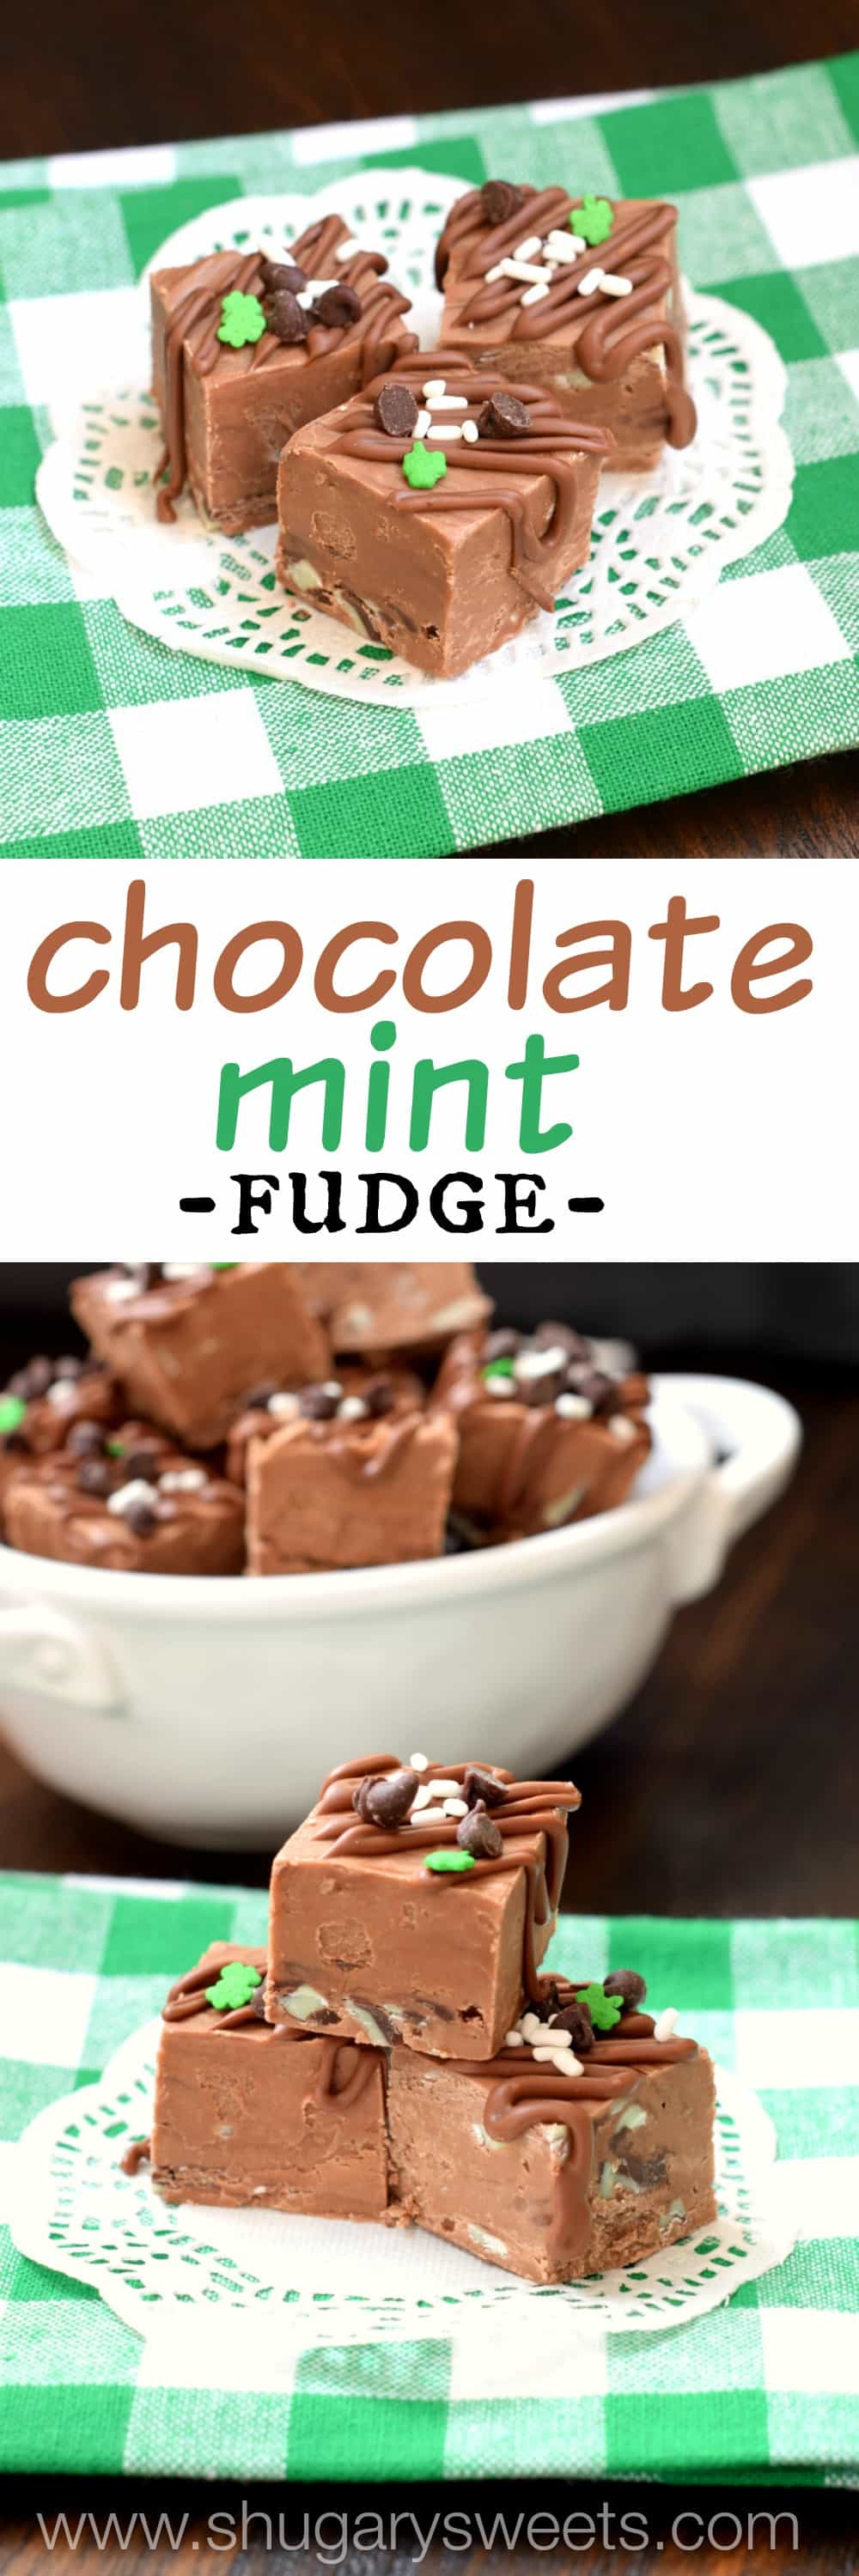 Andes Mint Fudge - Shugary Sweets